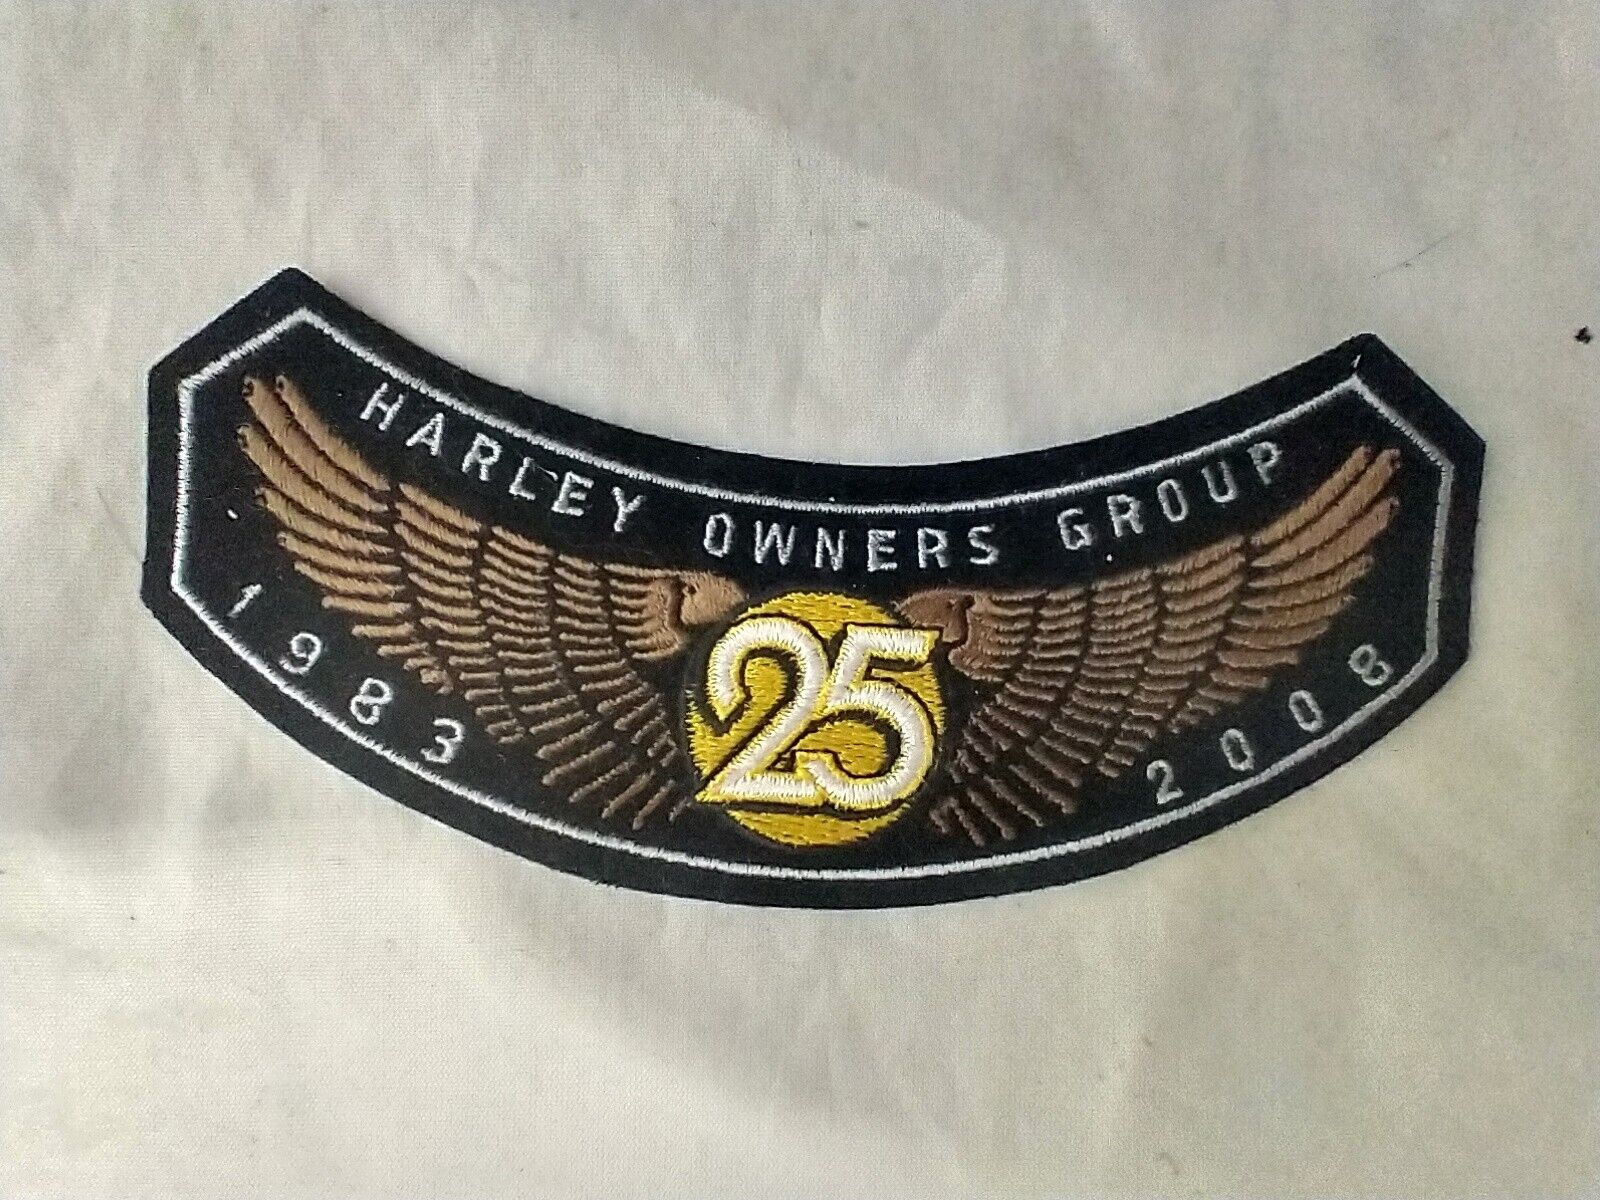 HOG Harley Owners Group - 25 years 1983 - 2008 Patch